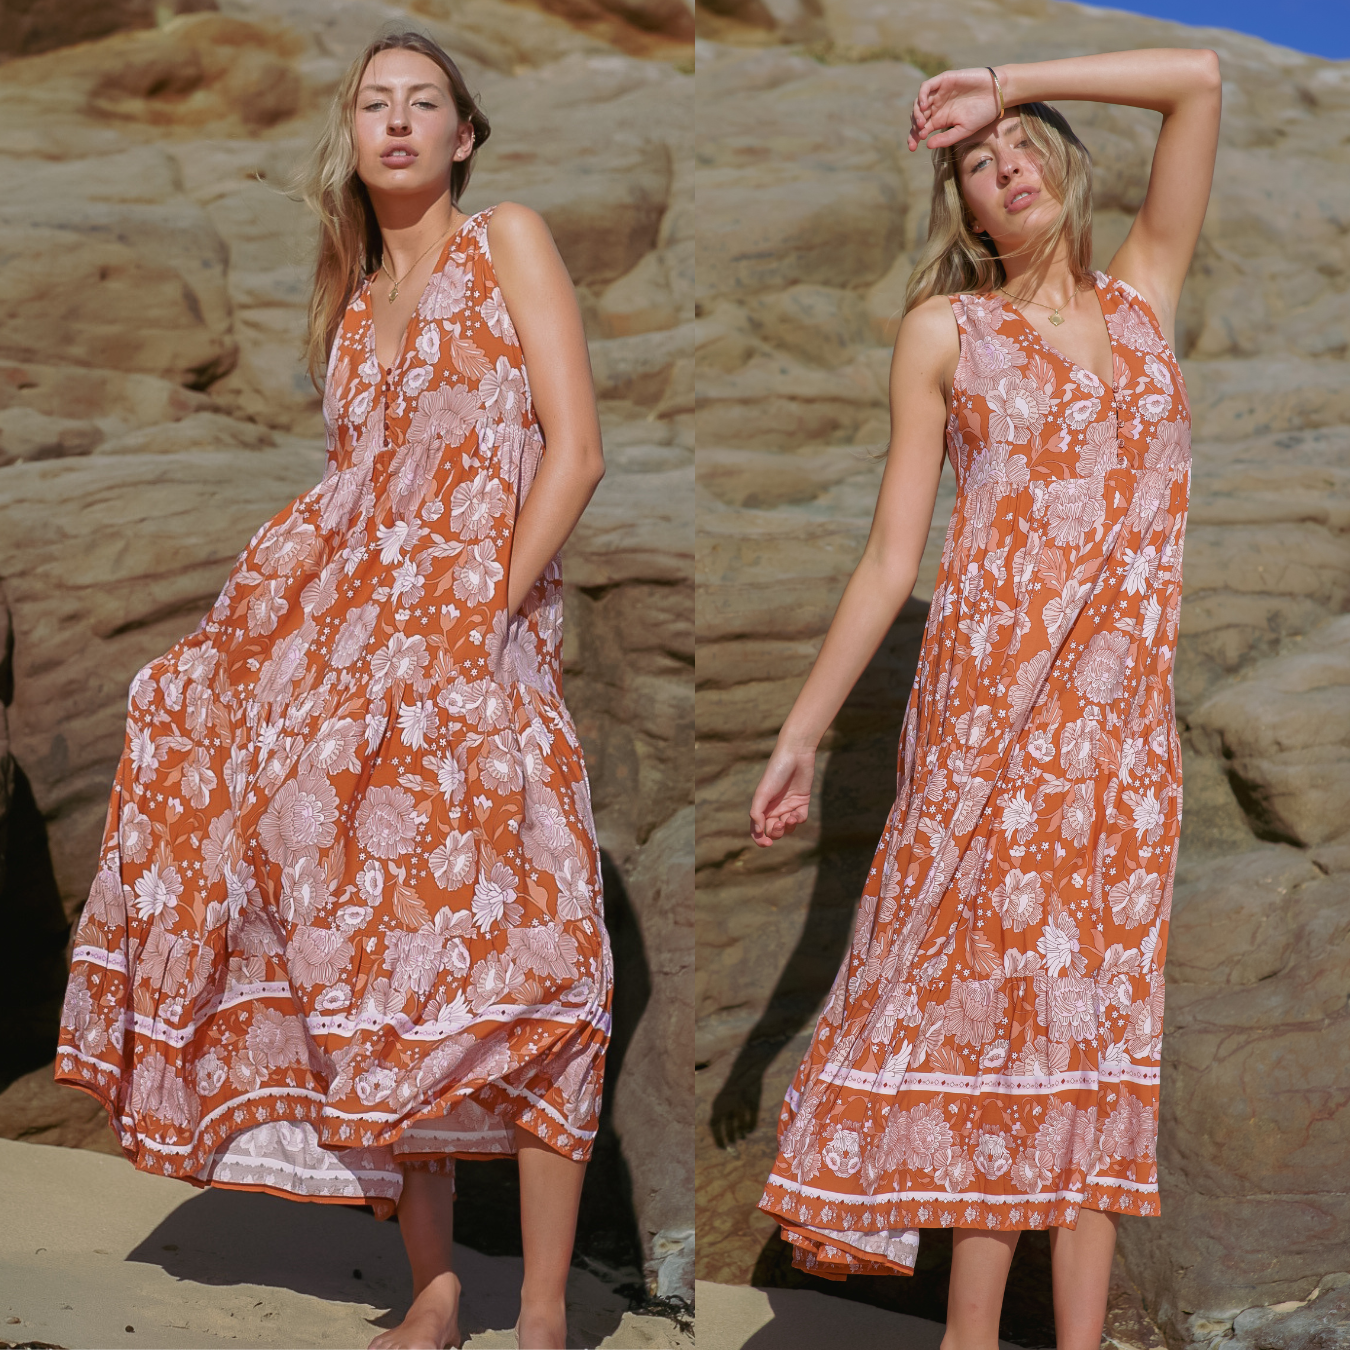 "Step into summer with our sleeveless long maxi dress. The beautiful floral print makes it a must-have for your wardrobe. Order now and shine!"